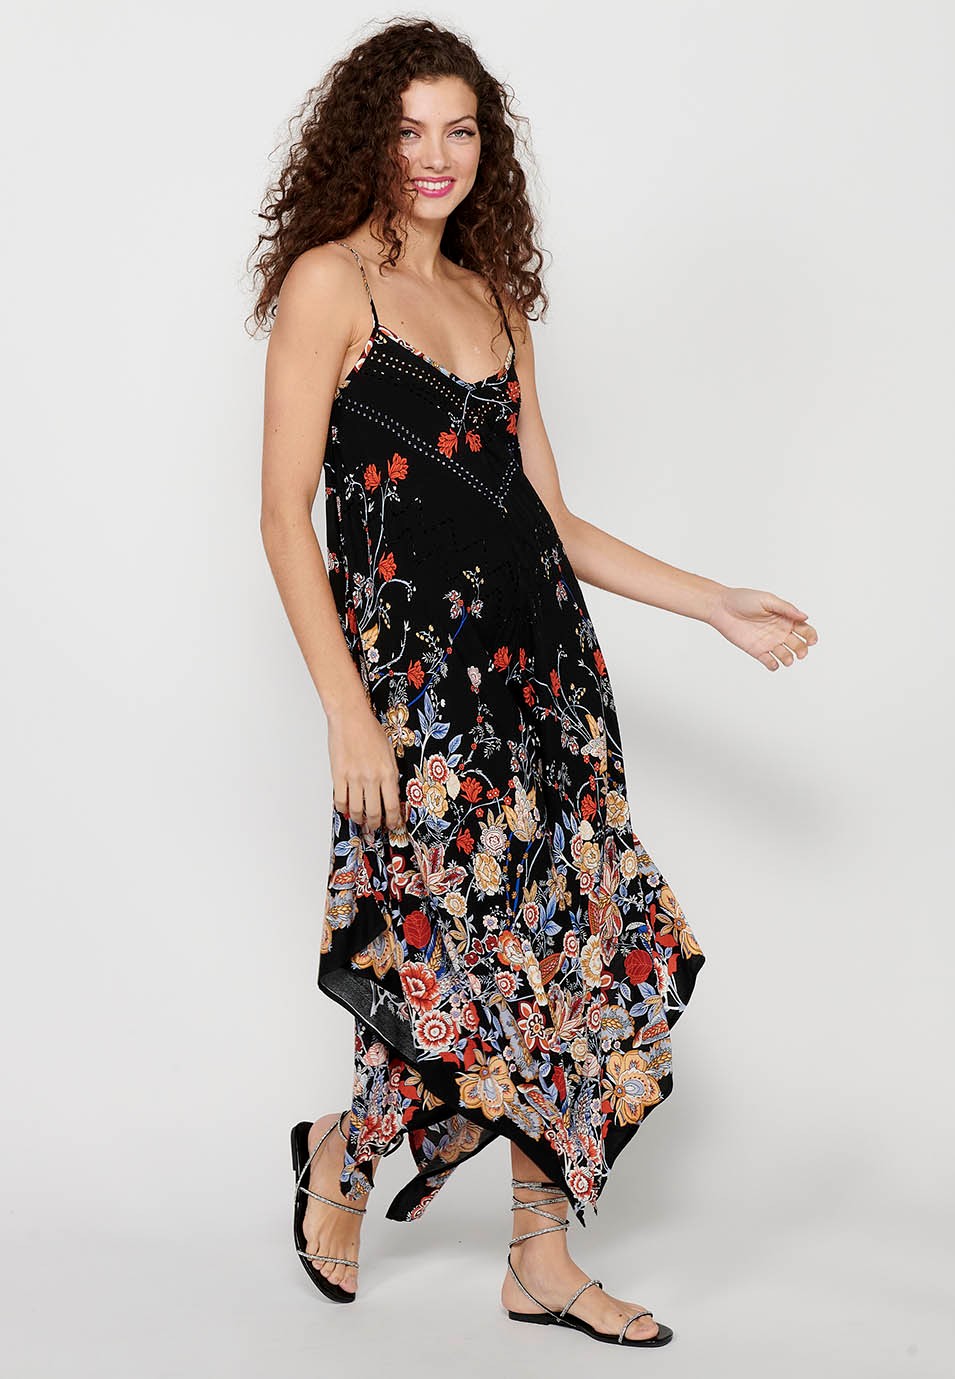 Strap Dress with V-neck and Black Floral Print for Women 3